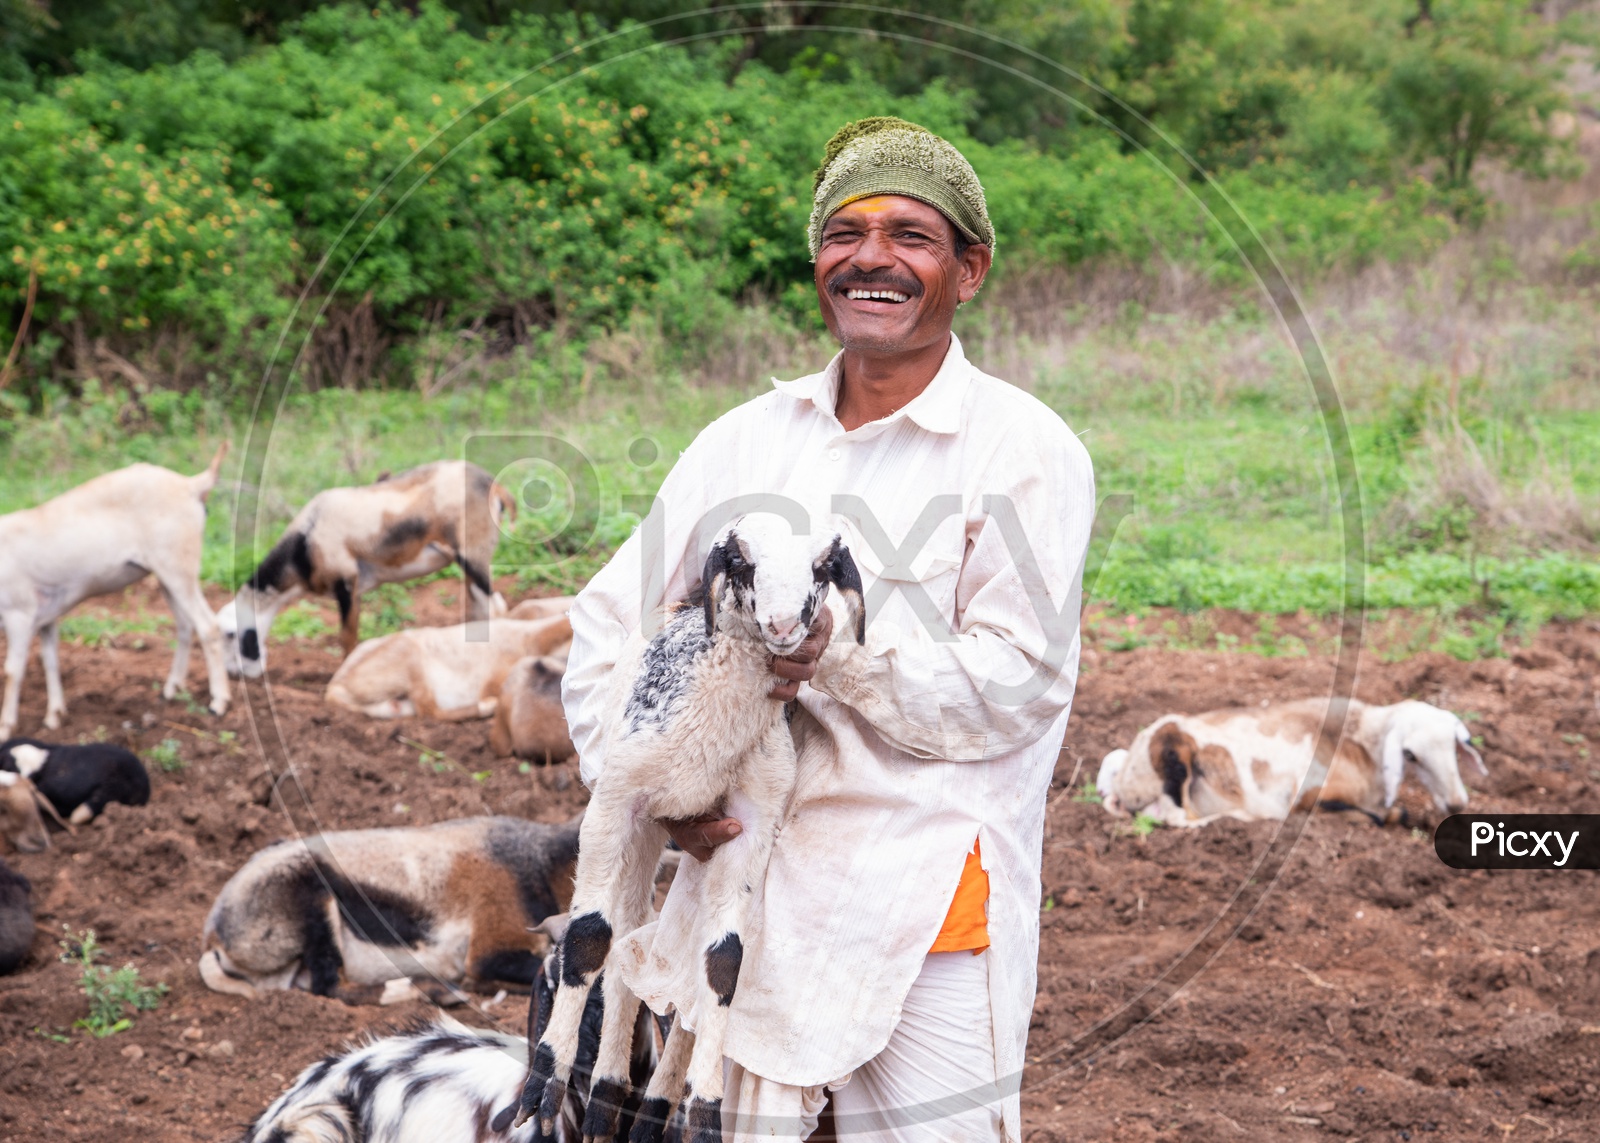 Shepherd carry a goat as he poses for a photo